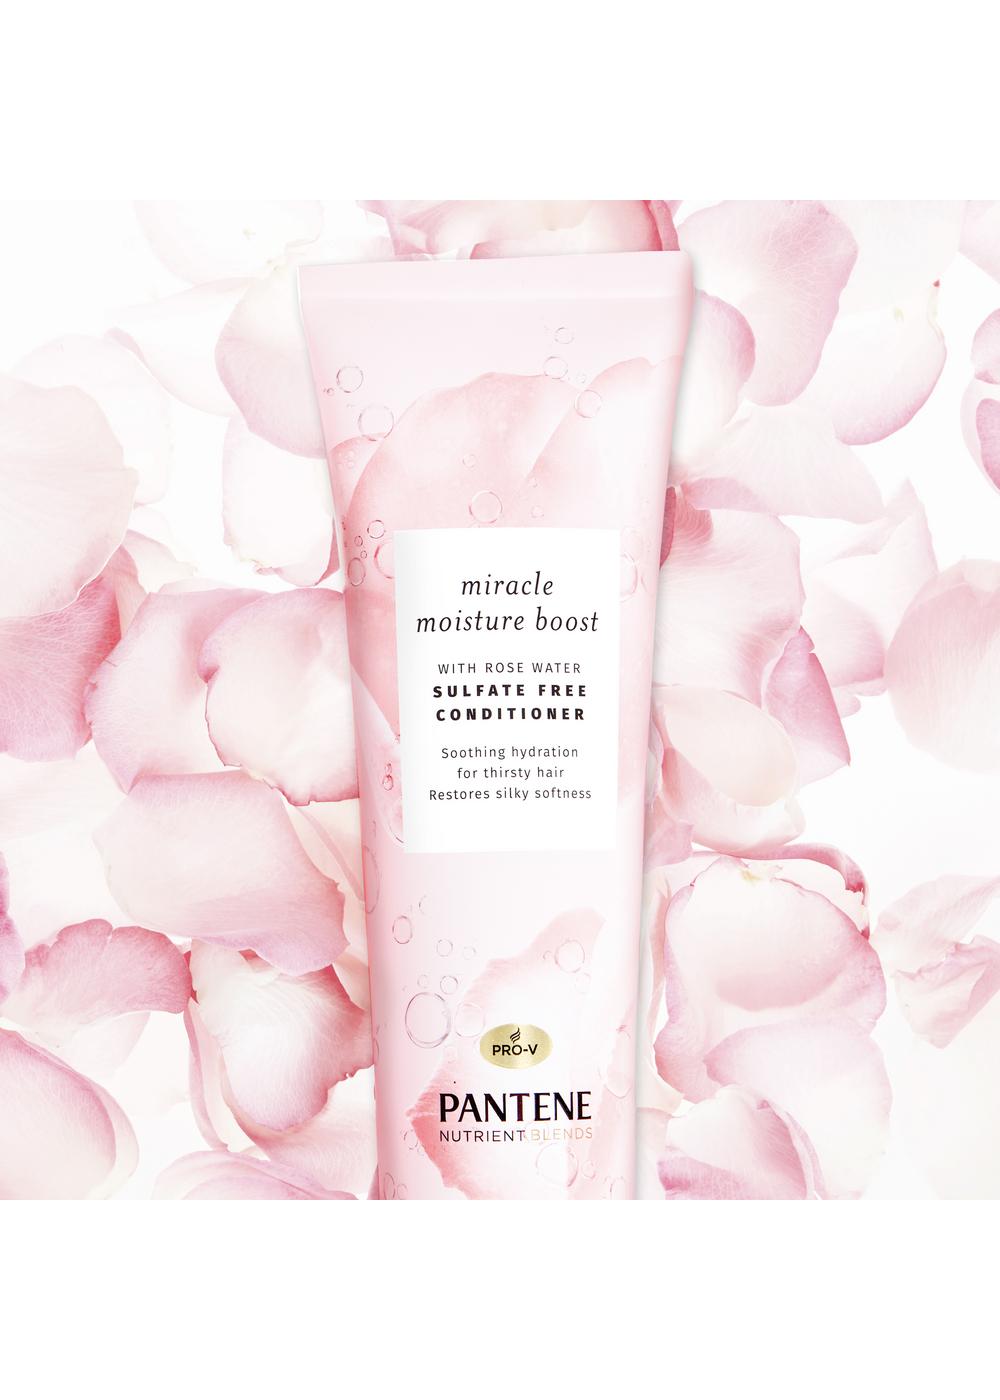 Pantene Pro-V Nutrient Blends Miracle Moisture Boost Conditioner; image 5 of 10